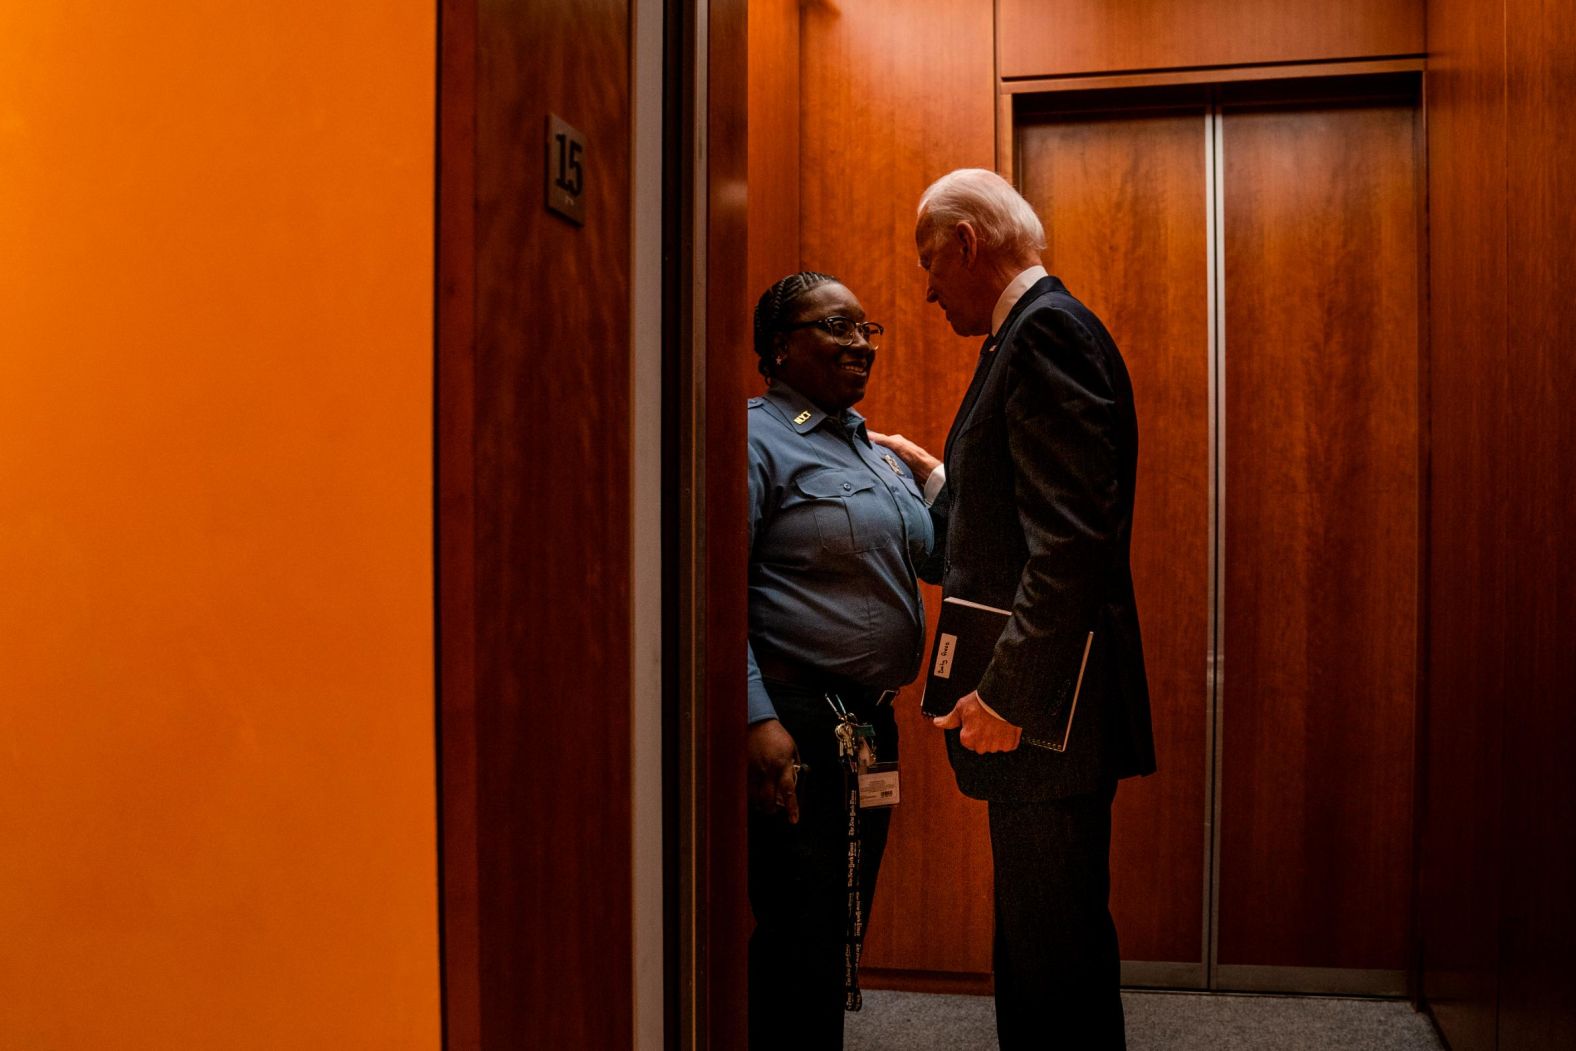 Biden speaks with Jacquelyn Brittany, a security guard at The New York Times, in December 2019. Brittany was escorting Biden to a Times editorial board meeting when she said: "I love you. I do. You're like my favorite." <a href="https://www.cnn.com/videos/politics/2020/01/21/joe-biden-elevator-selfie-new-york-times-endorsement-orig-llr.cnn" target="_blank">The exchange</a> was aired as part of the Times' TV series "The Weekly," and was circulated on social media. In August 2020, <a href="https://www.cnn.com/2020/08/18/politics/security-guard-elevator-biden-convention/index.html" target="_blank">Brittany gave the first speech</a> officially nominating Biden for president at the Democratic National Convention. "I take powerful people up on my elevator all the time," Brittany said. "When they get off, they go to their important meetings. Me, I just head back to the lobby. But in the short time I spent with Joe Biden, I could tell he really saw me. That he actually cared, that my life meant something to him. And I knew even when he went into his important meeting, he'd take my story in there with him." Biden <a href="https://twitter.com/JoeBiden/status/1295900540694433792" target="_blank" target="_blank">responded on Twitter</a>: "Jacquelyn: Your nomination means the world to me. Thank you — and I hope you know: we love you back."